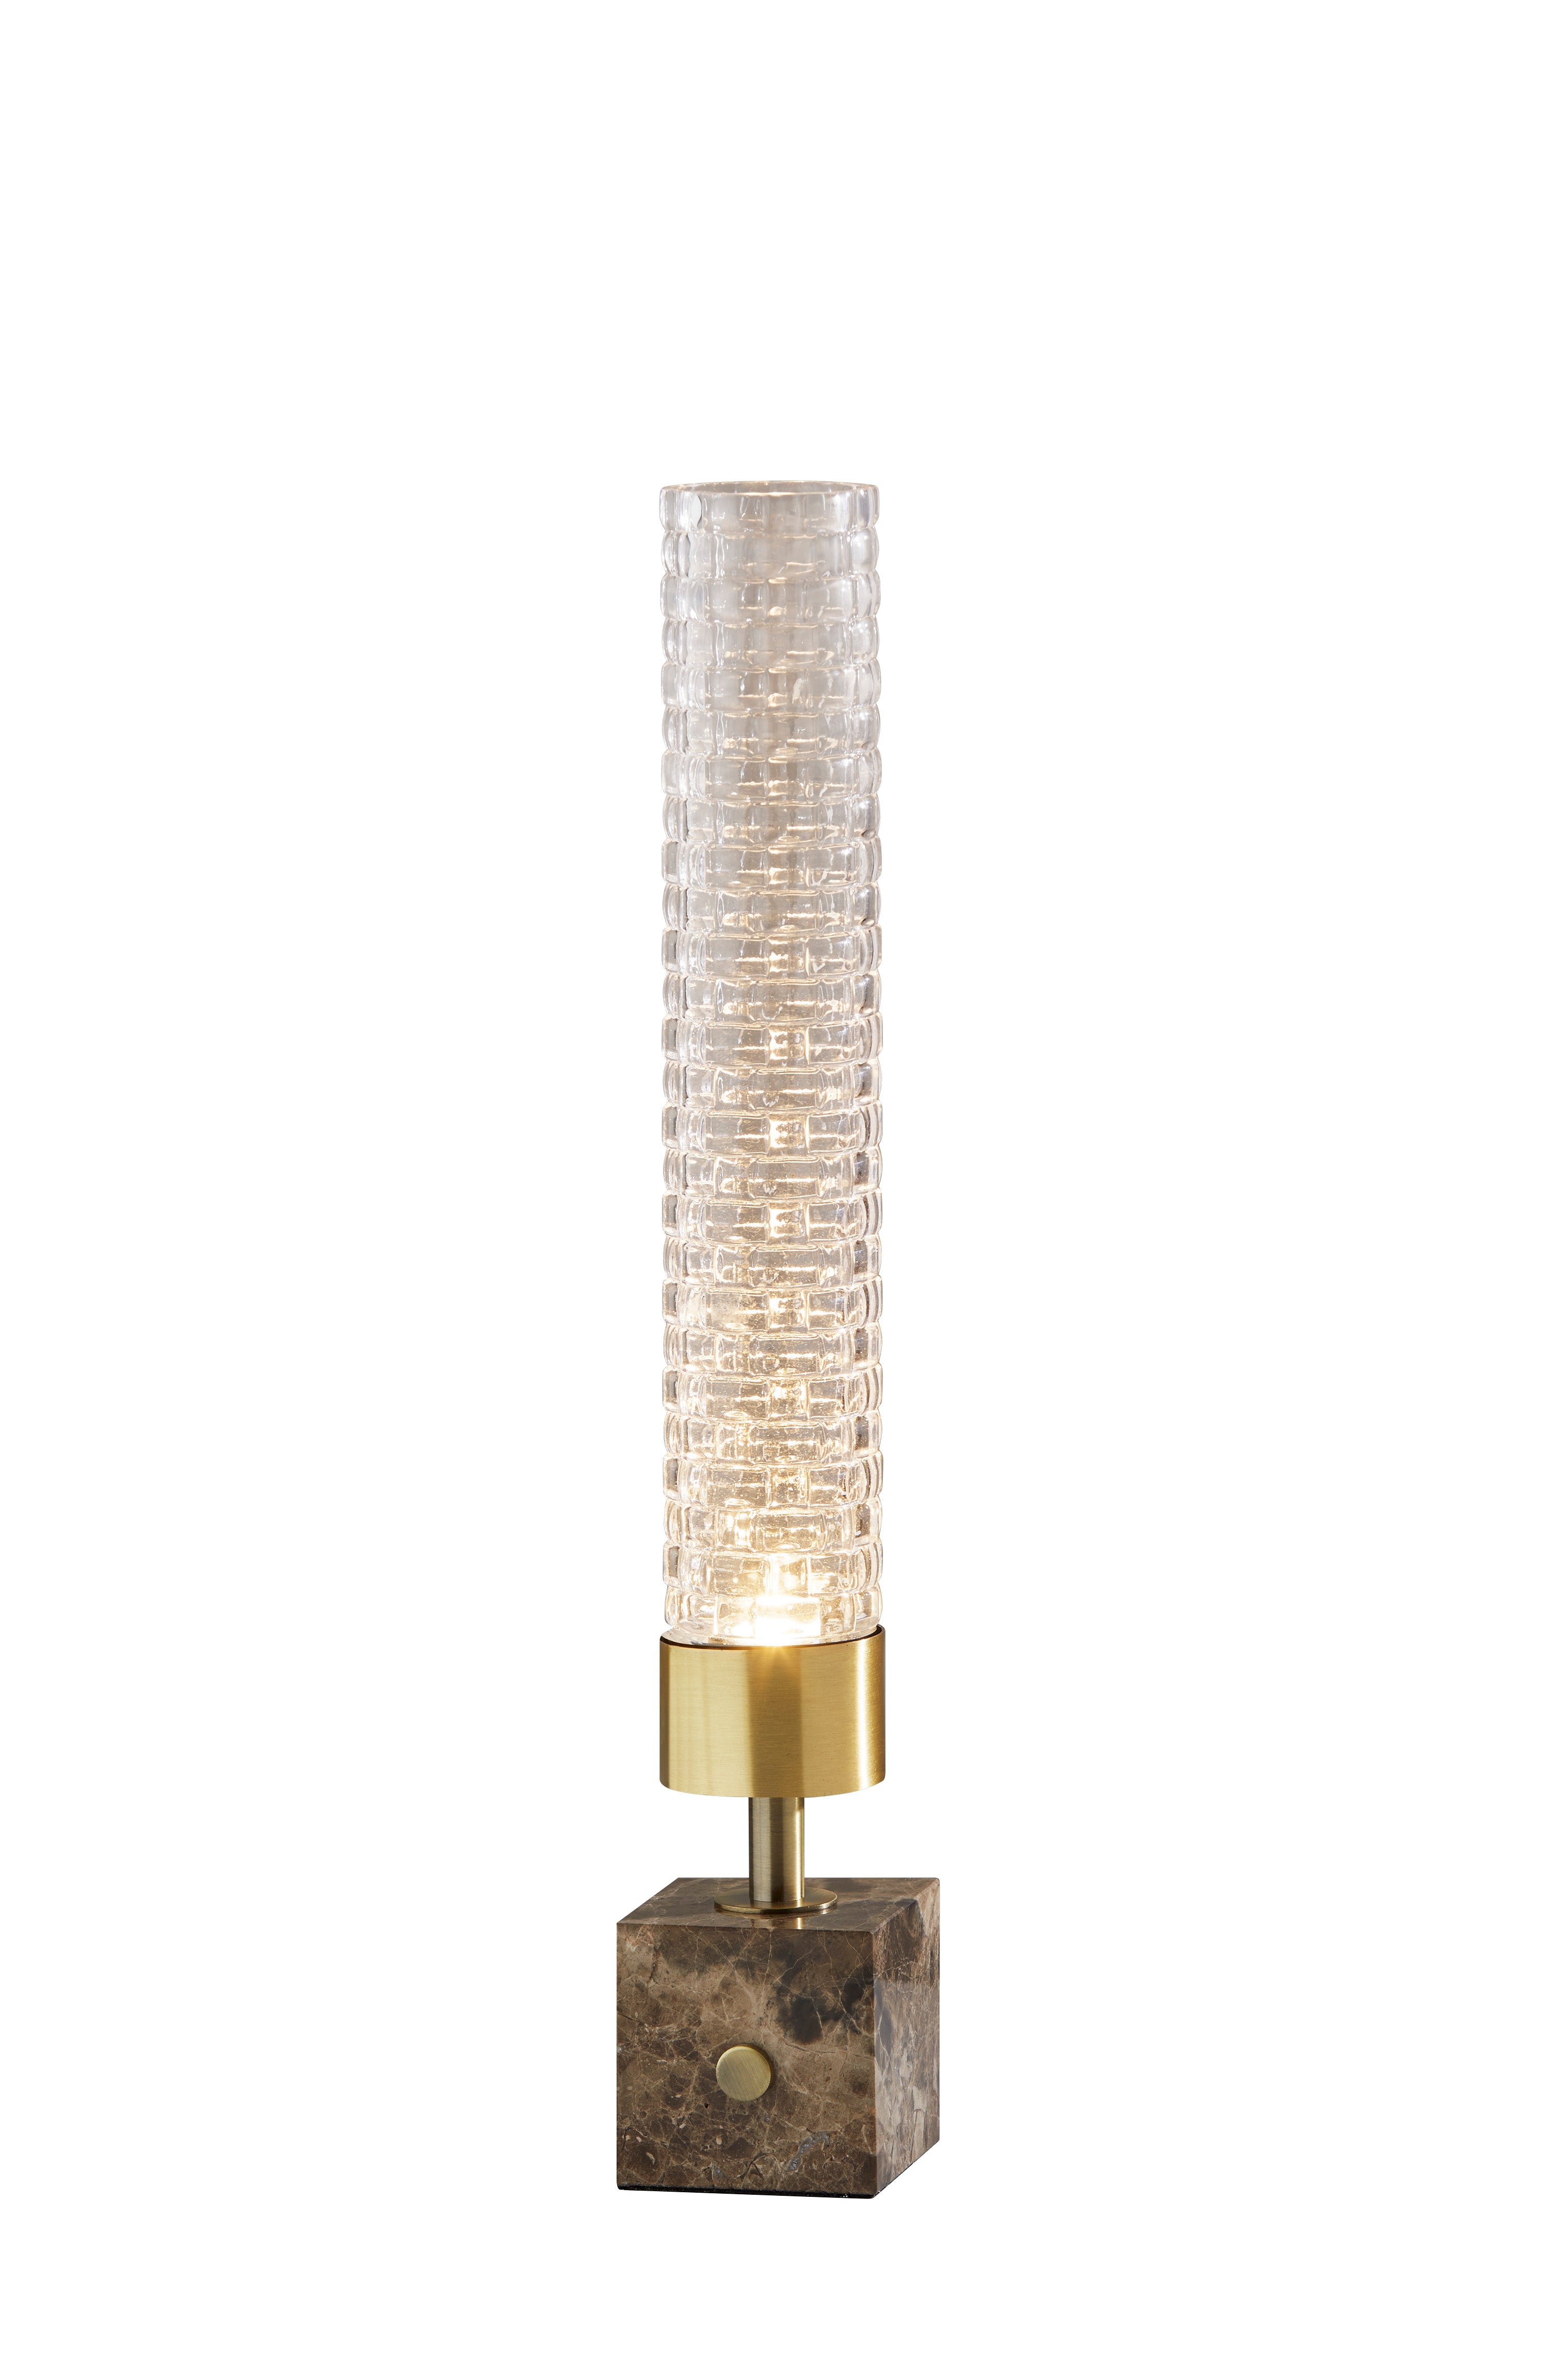 HARRIET Table lamp Gold INTEGRATED LED - 3697-21 | ADESSO